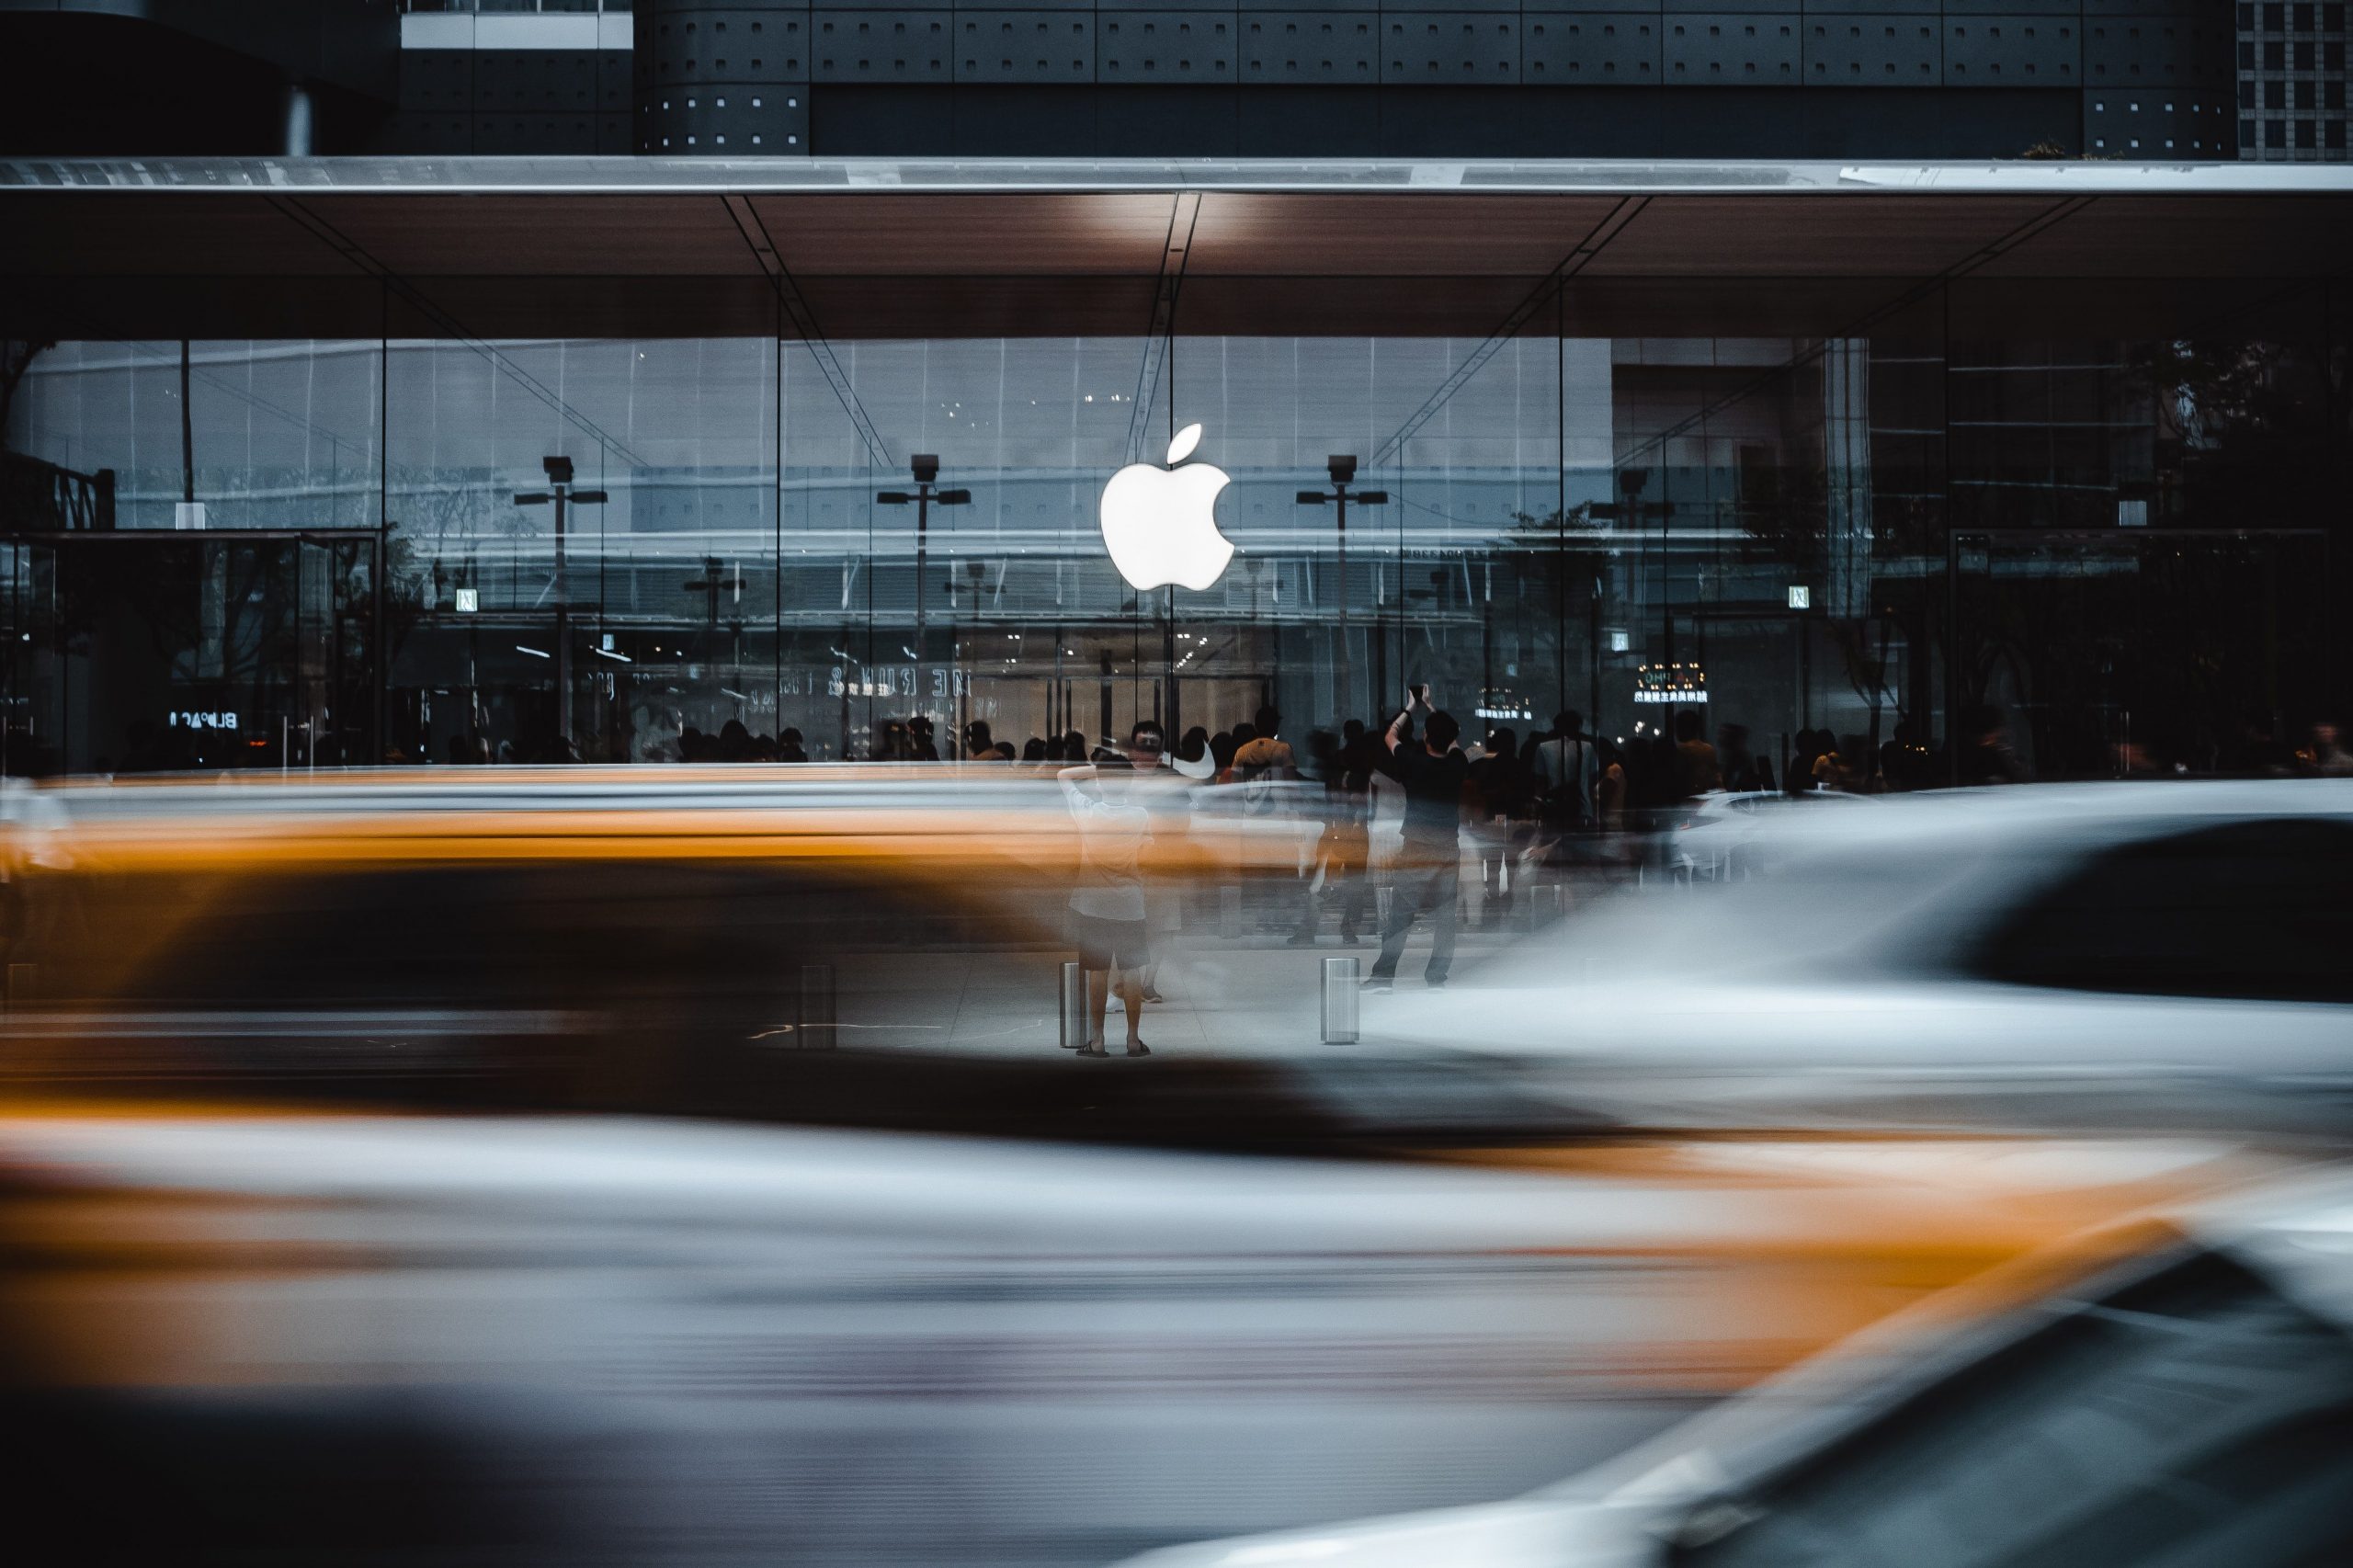 Car crashes into Apple Store in Hingham, Massachusetts: All you need to know